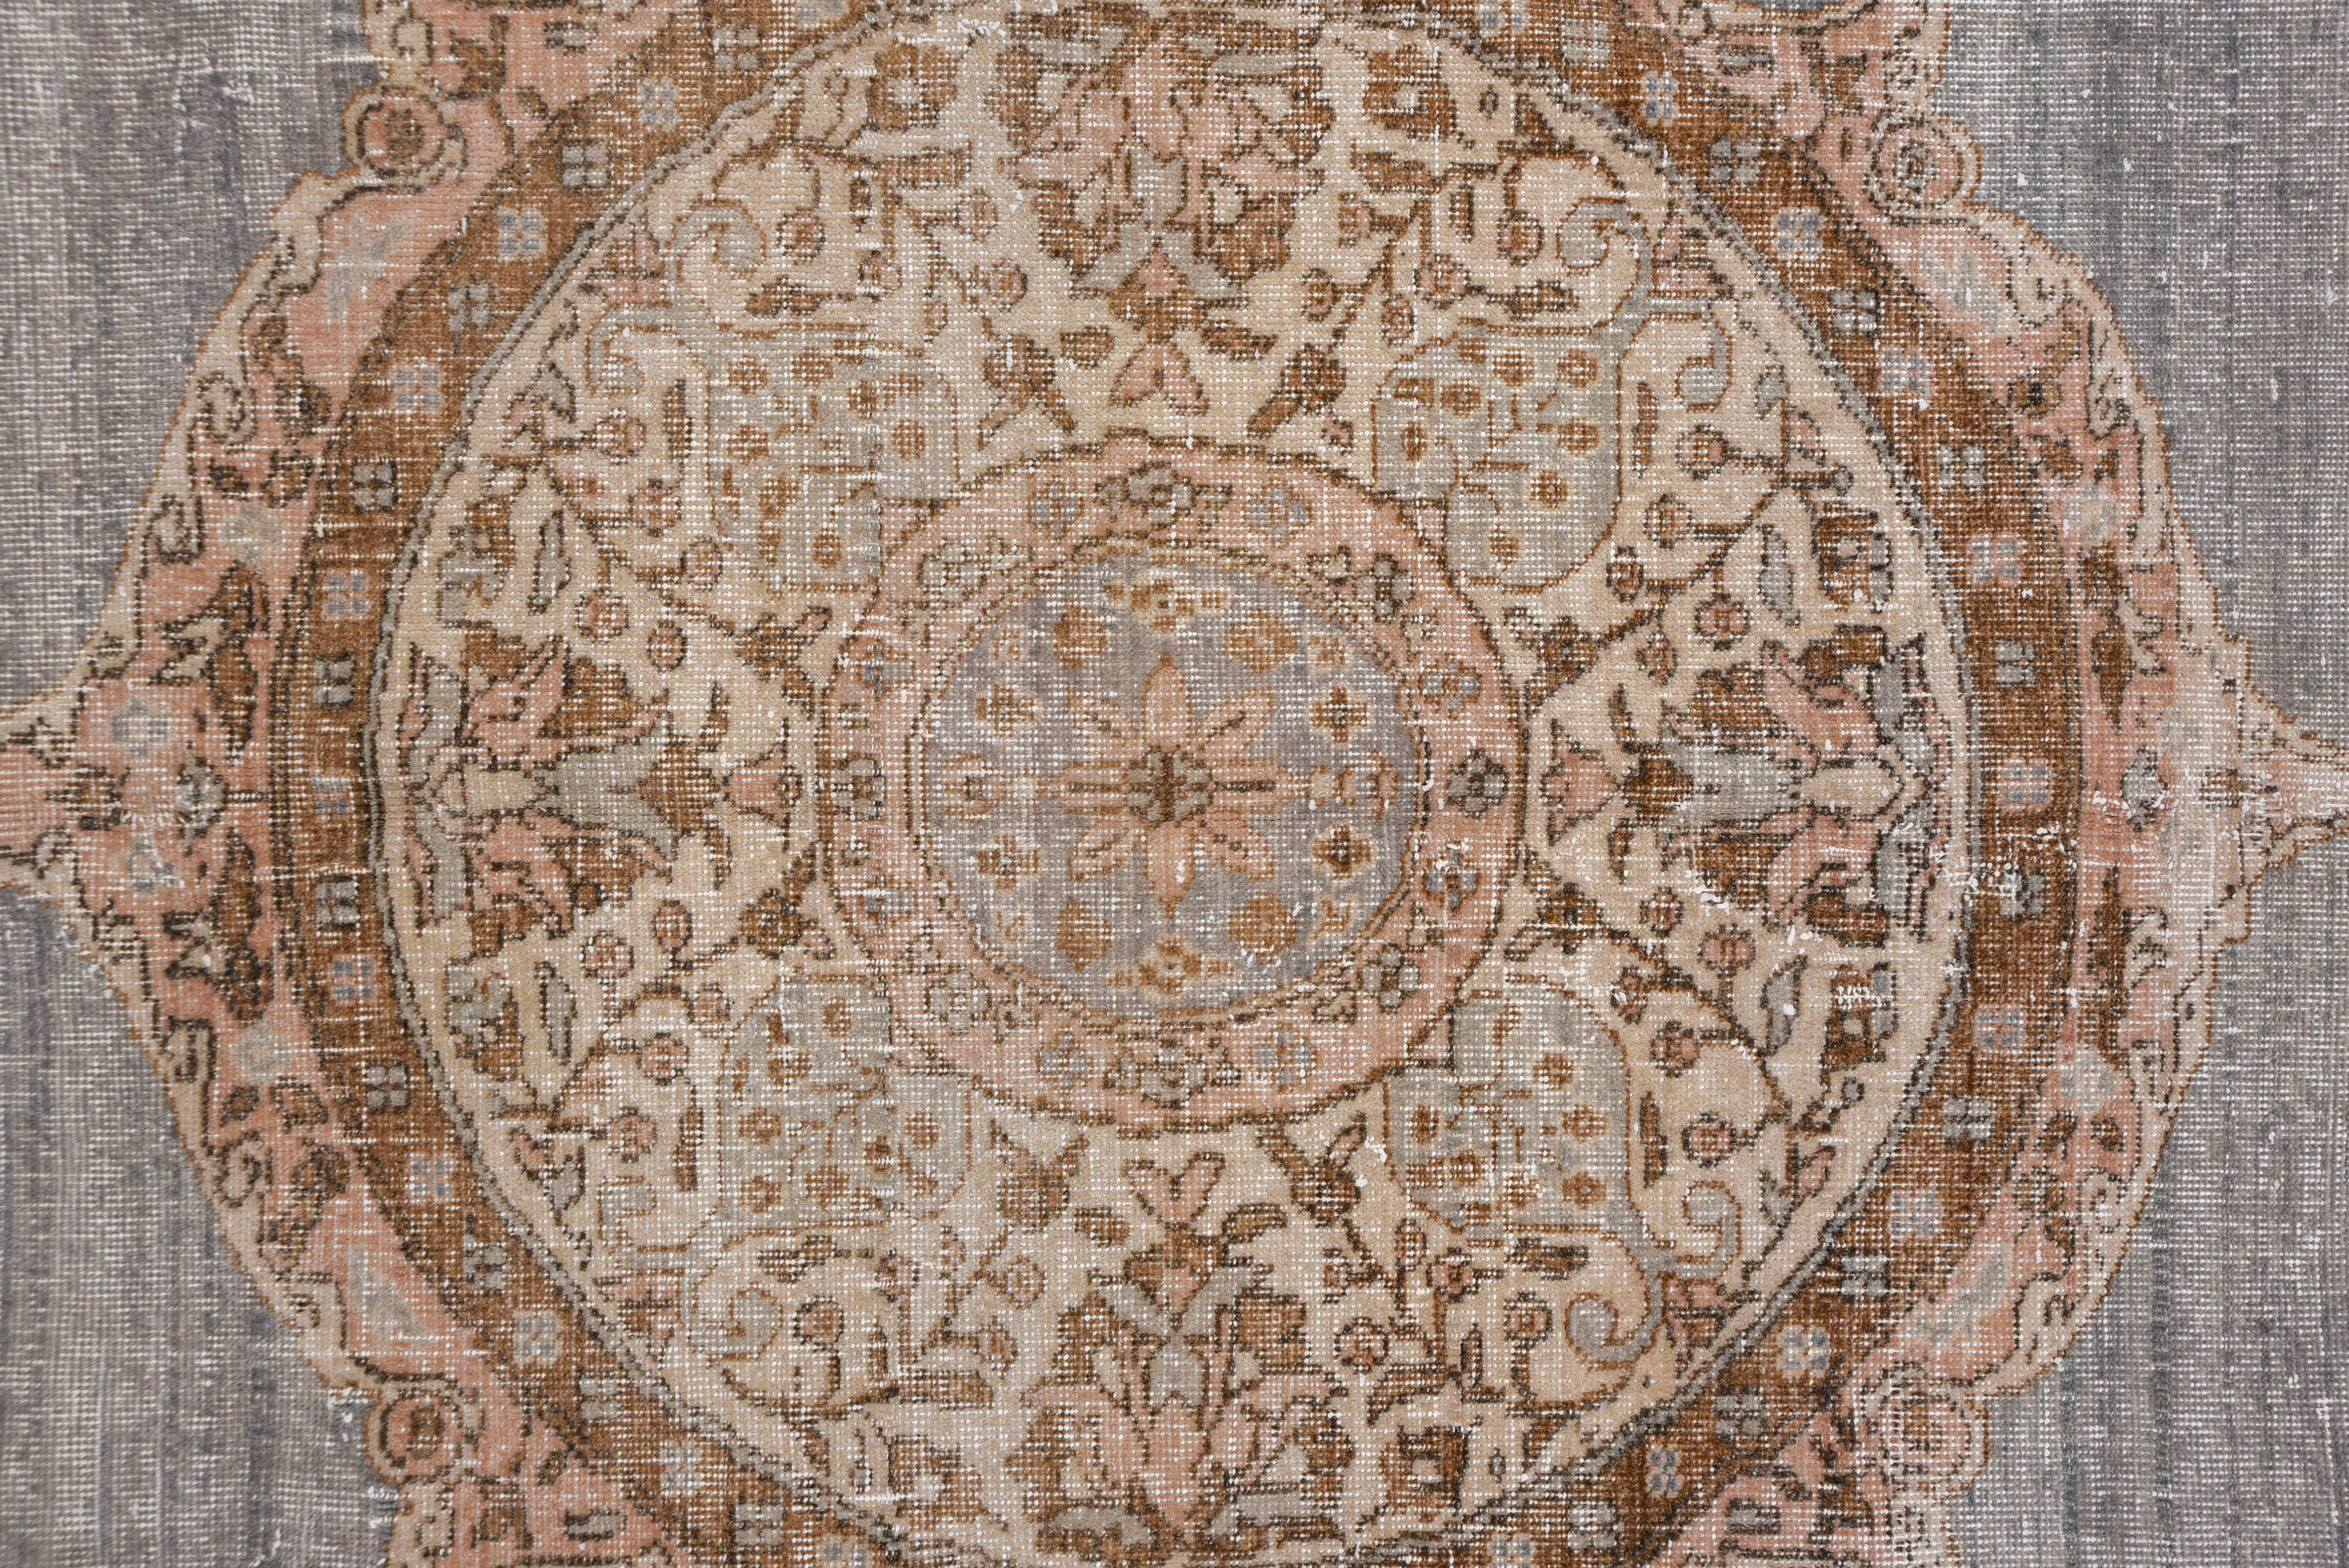 Hand-Knotted Shabby Chic Oushak Rug, Light Blue and Gray Field, Circular Center Medallion